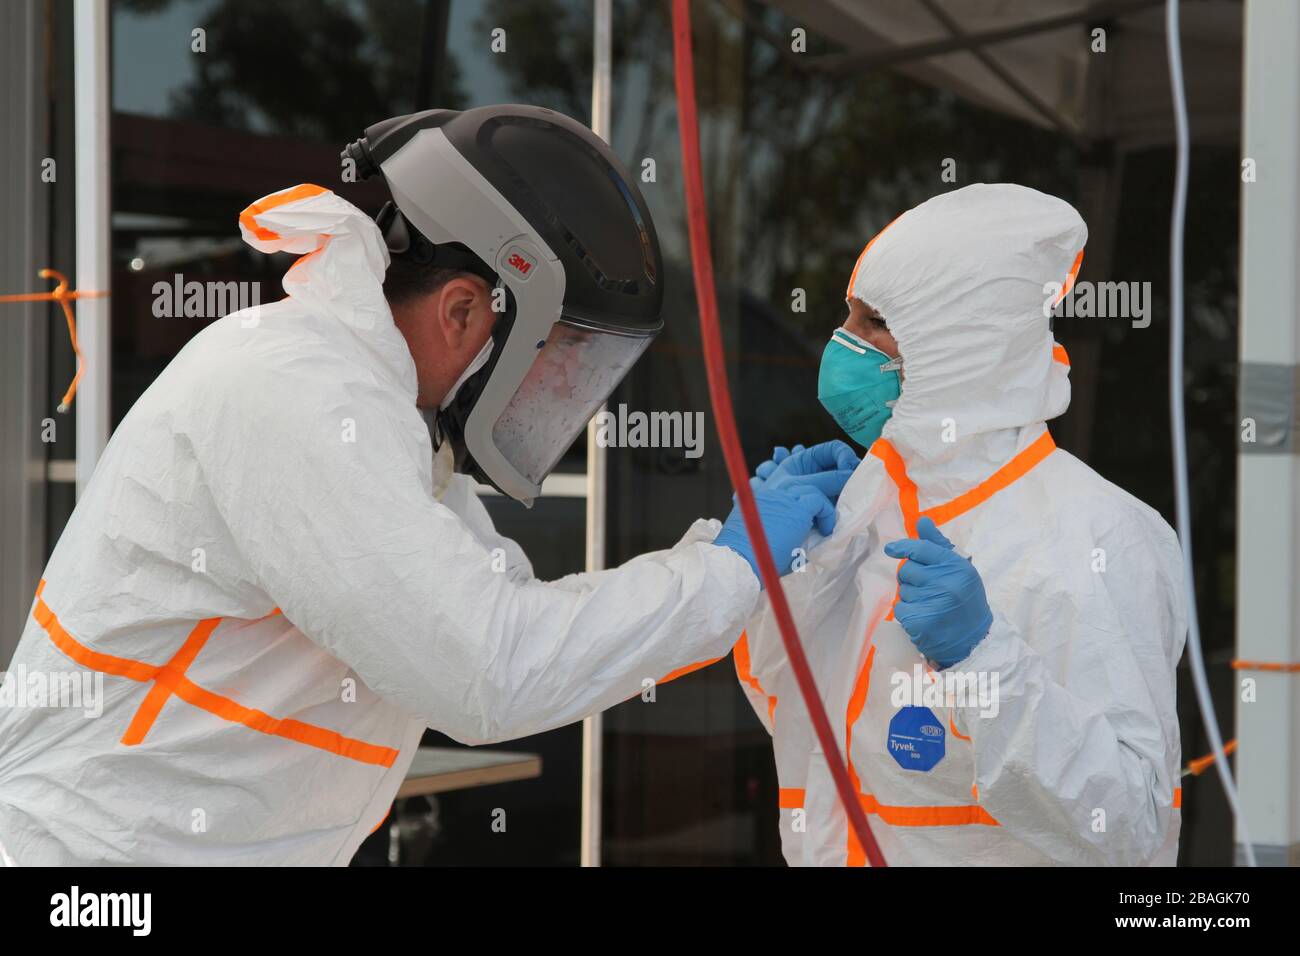 San Mateo, United States. 27th Mar, 2020. A California State Guard member and a California Emergency Medical Service Authority staff member suit up with personal protective equipment before assisting with treating COVID-19 patients March 27, 2020 in San Mateo County, California. Credit: Eddie Siguenza/US Army/Alamy Live News Stock Photo